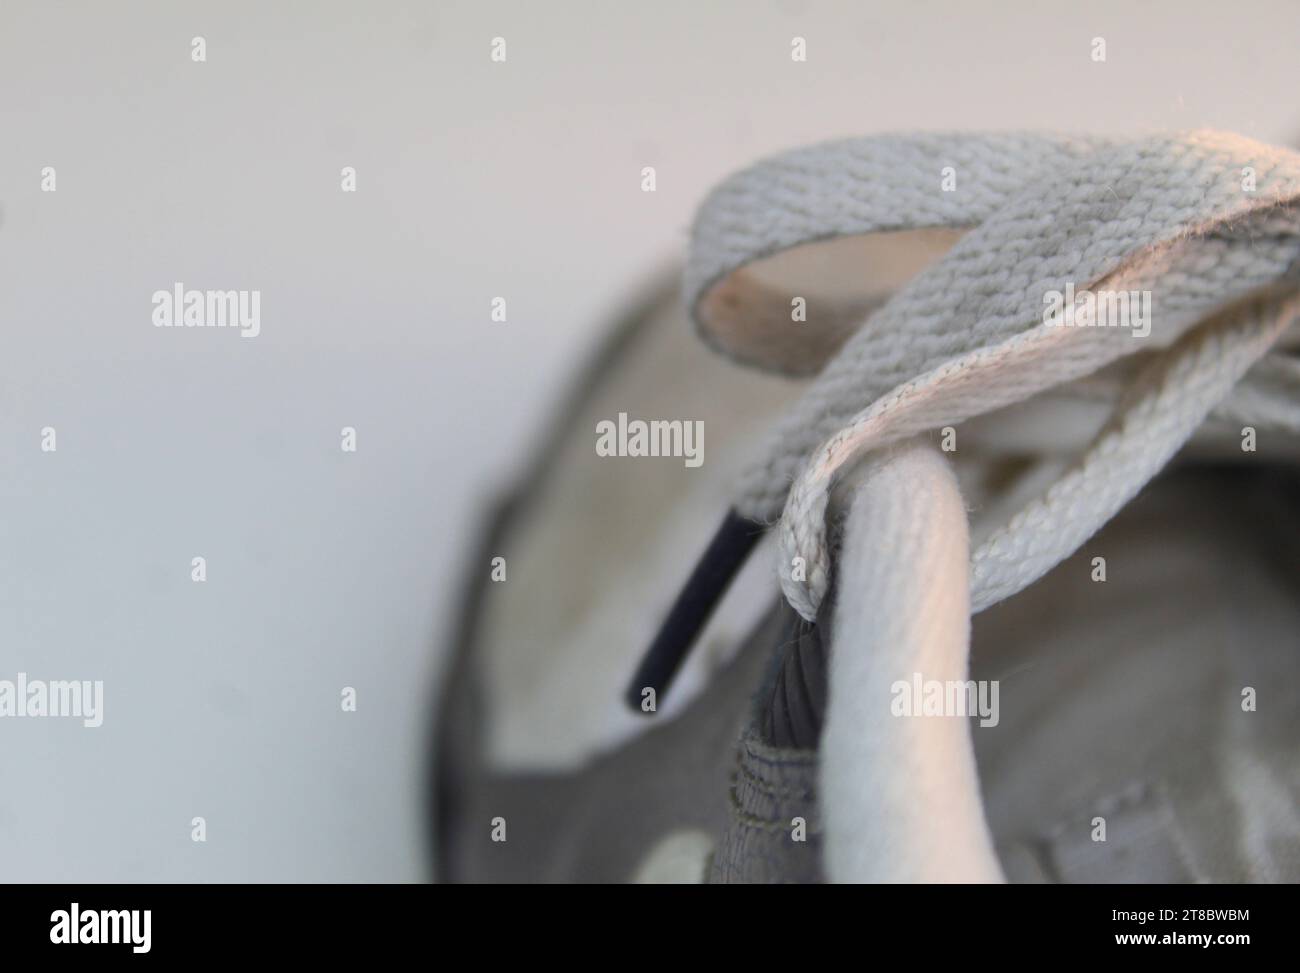 A close up photo of the shoelaces of white dirty Nike Air Max 90 Runners on a white desk. Stock Photo